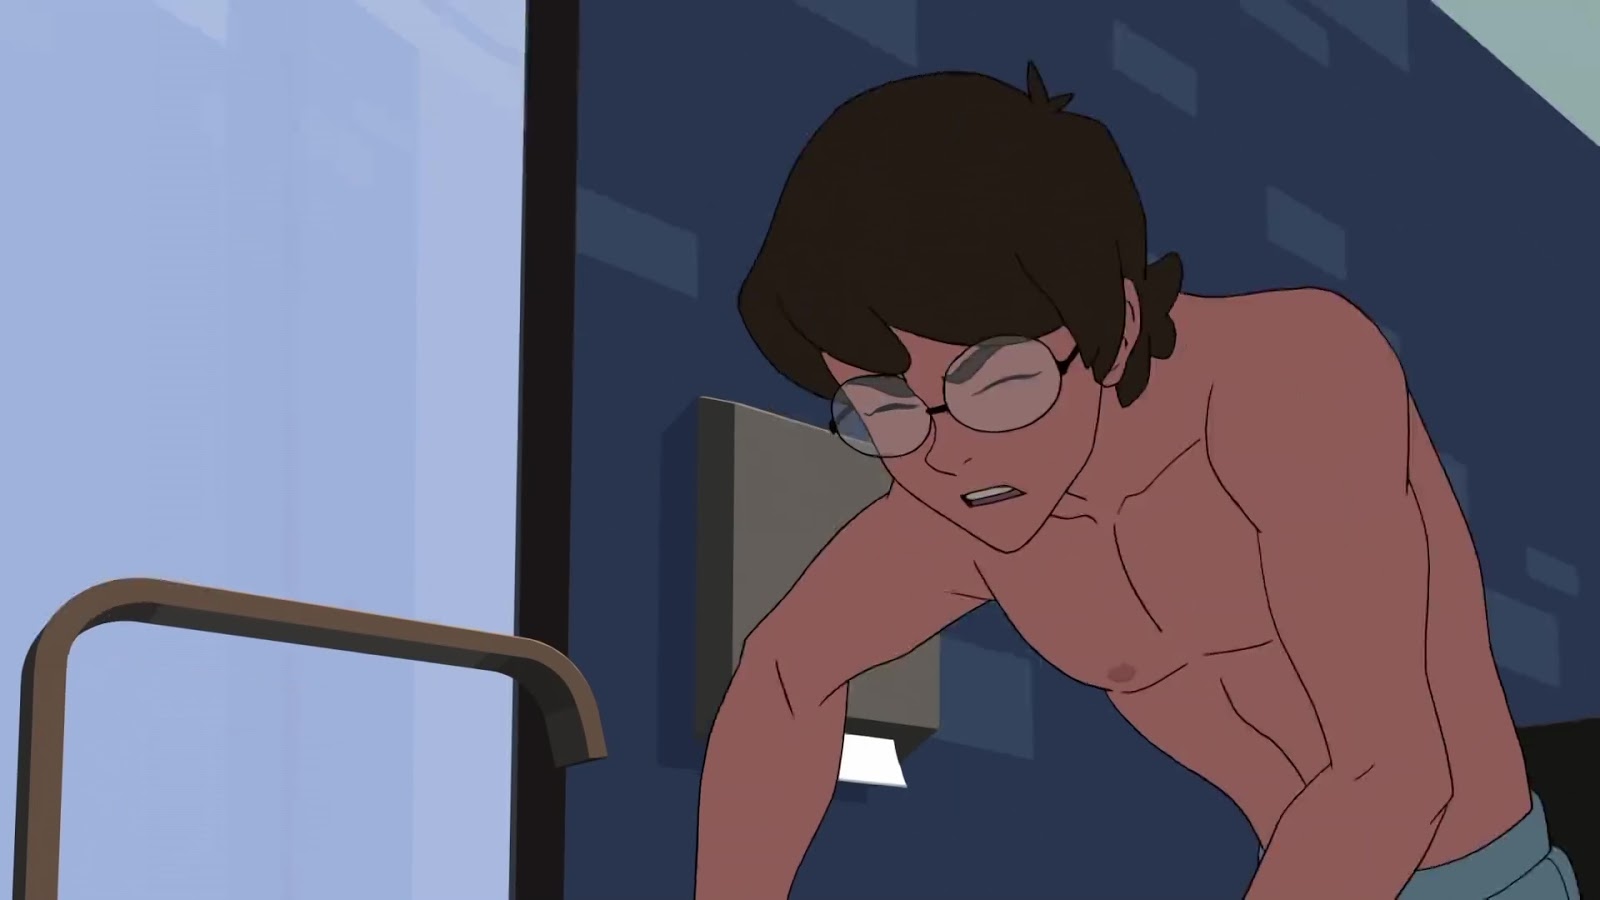 In the Marvel's Spider-Man animated short Origin, Part 2 shows the Spi...